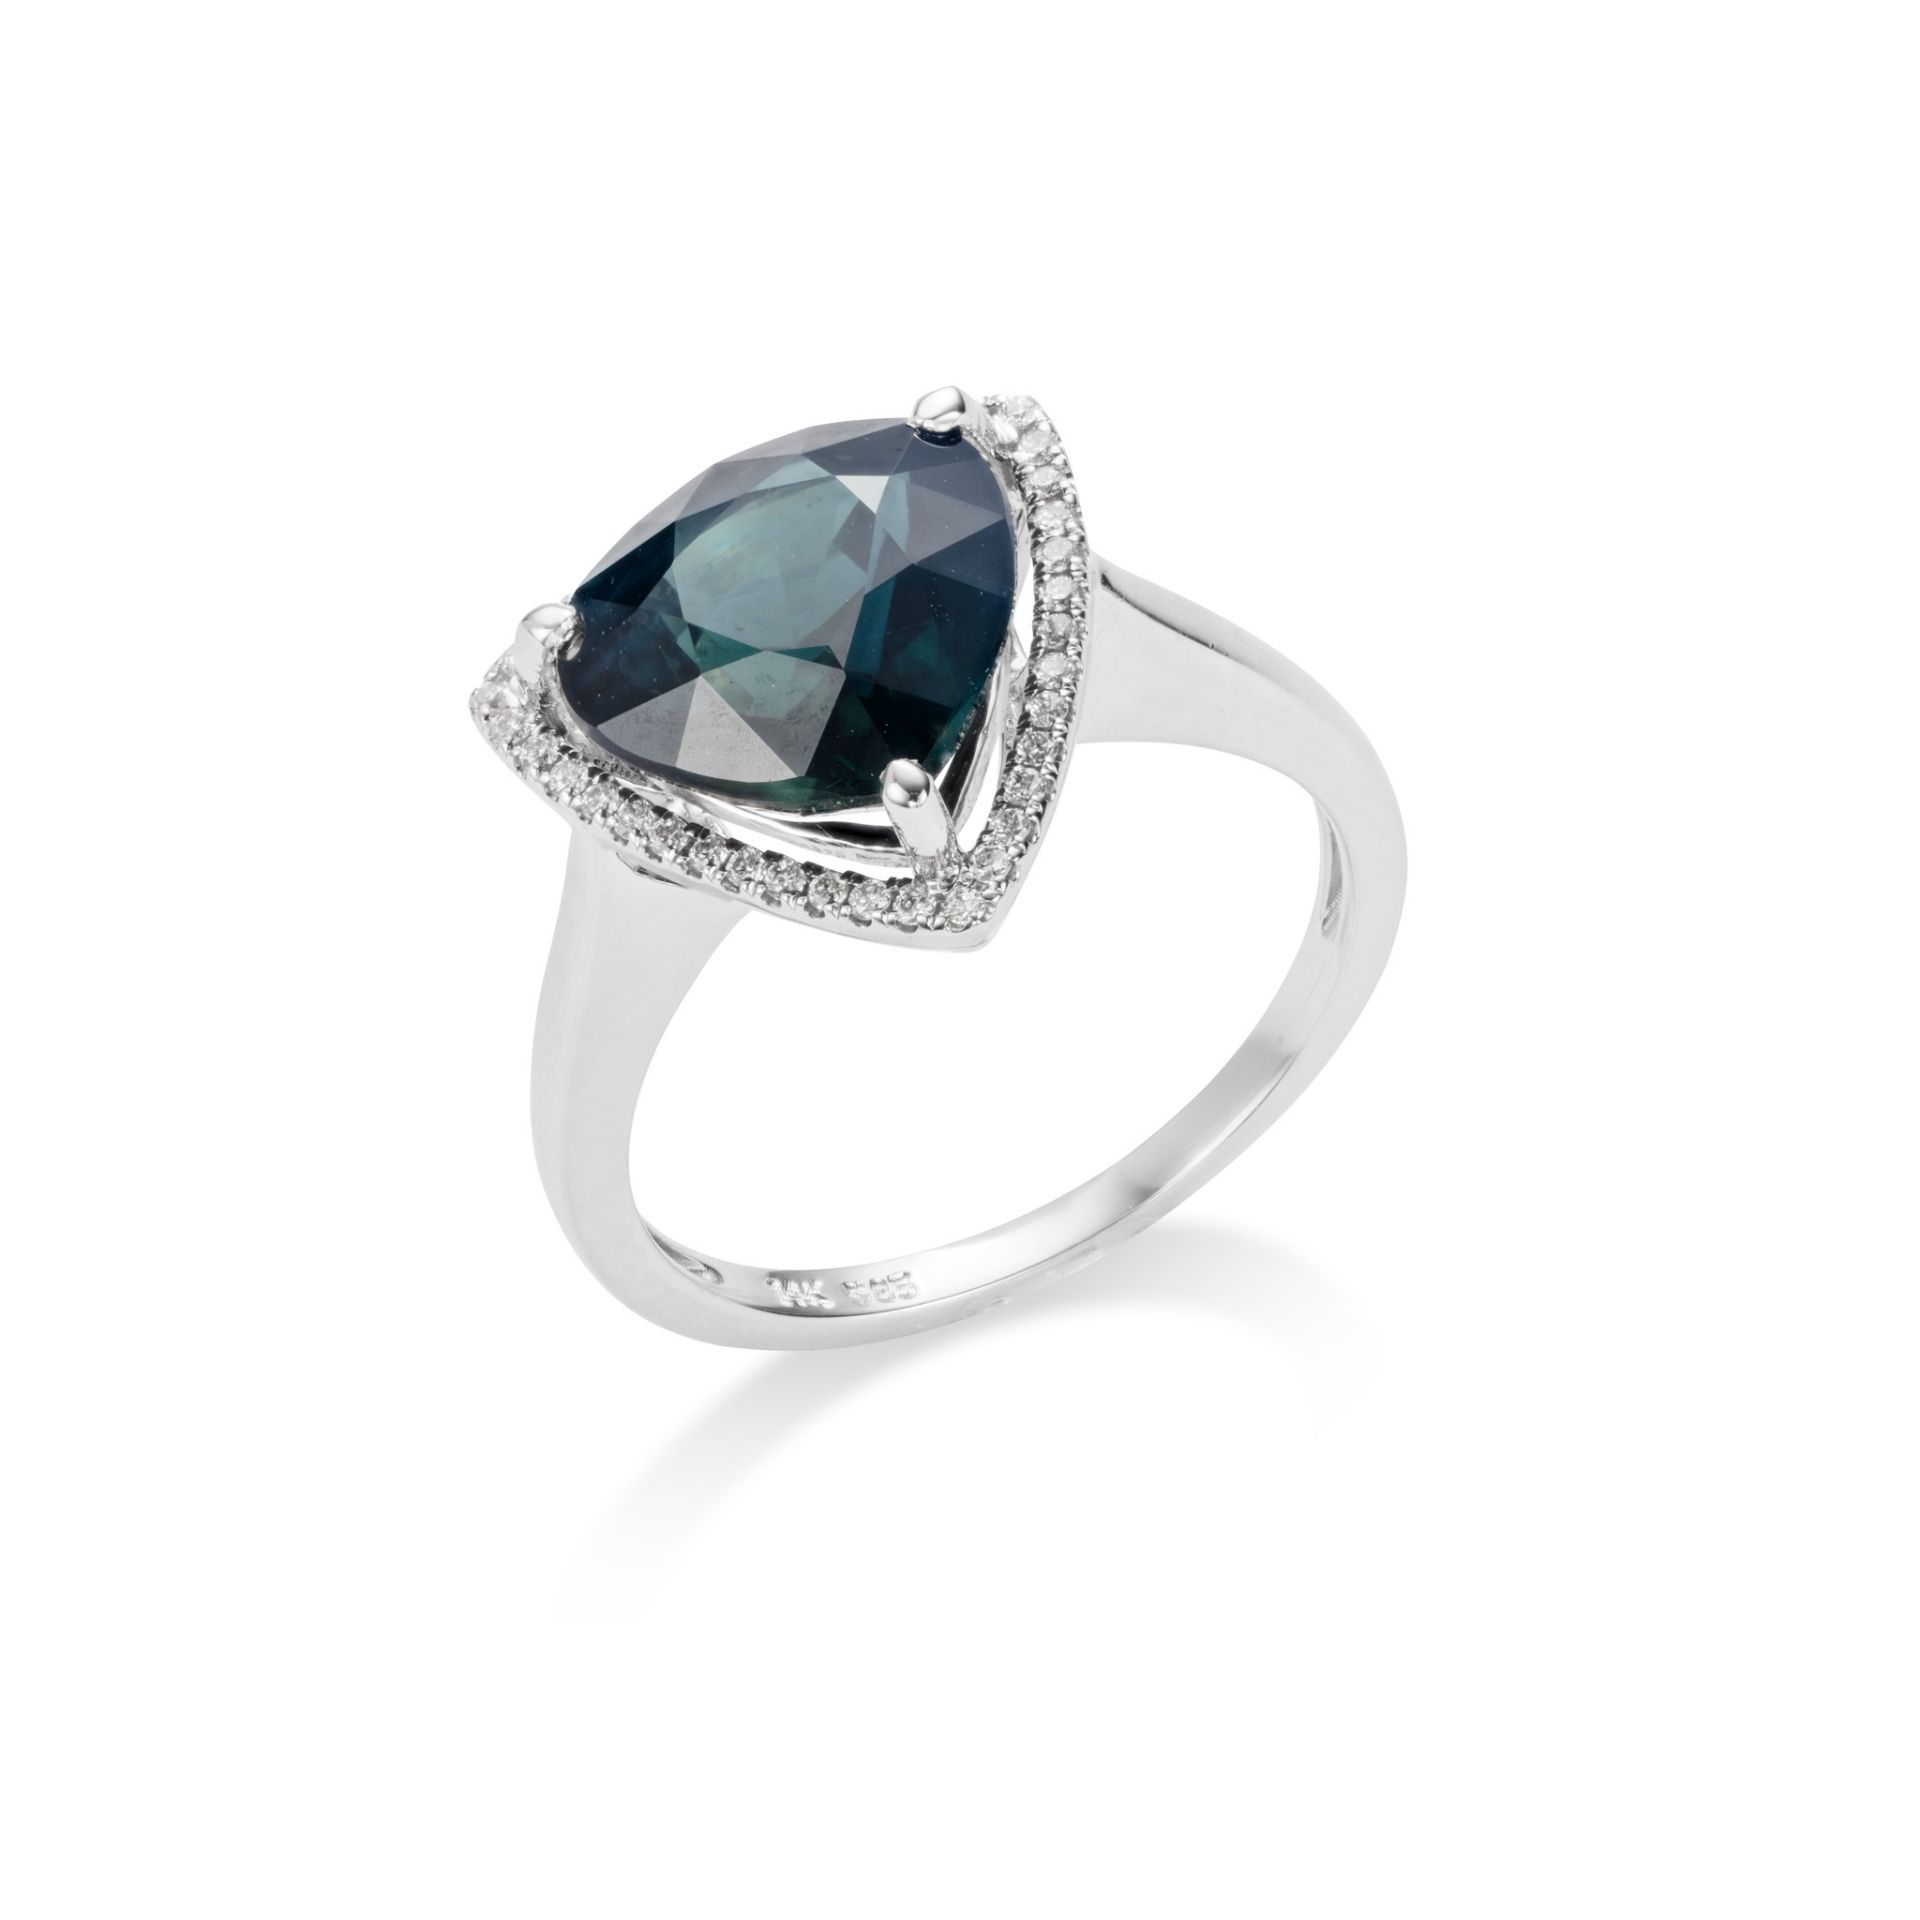 A sapphire and diamond ring The pear-shaped greenish-blue sapphire, weighing 5.11 carats, within a